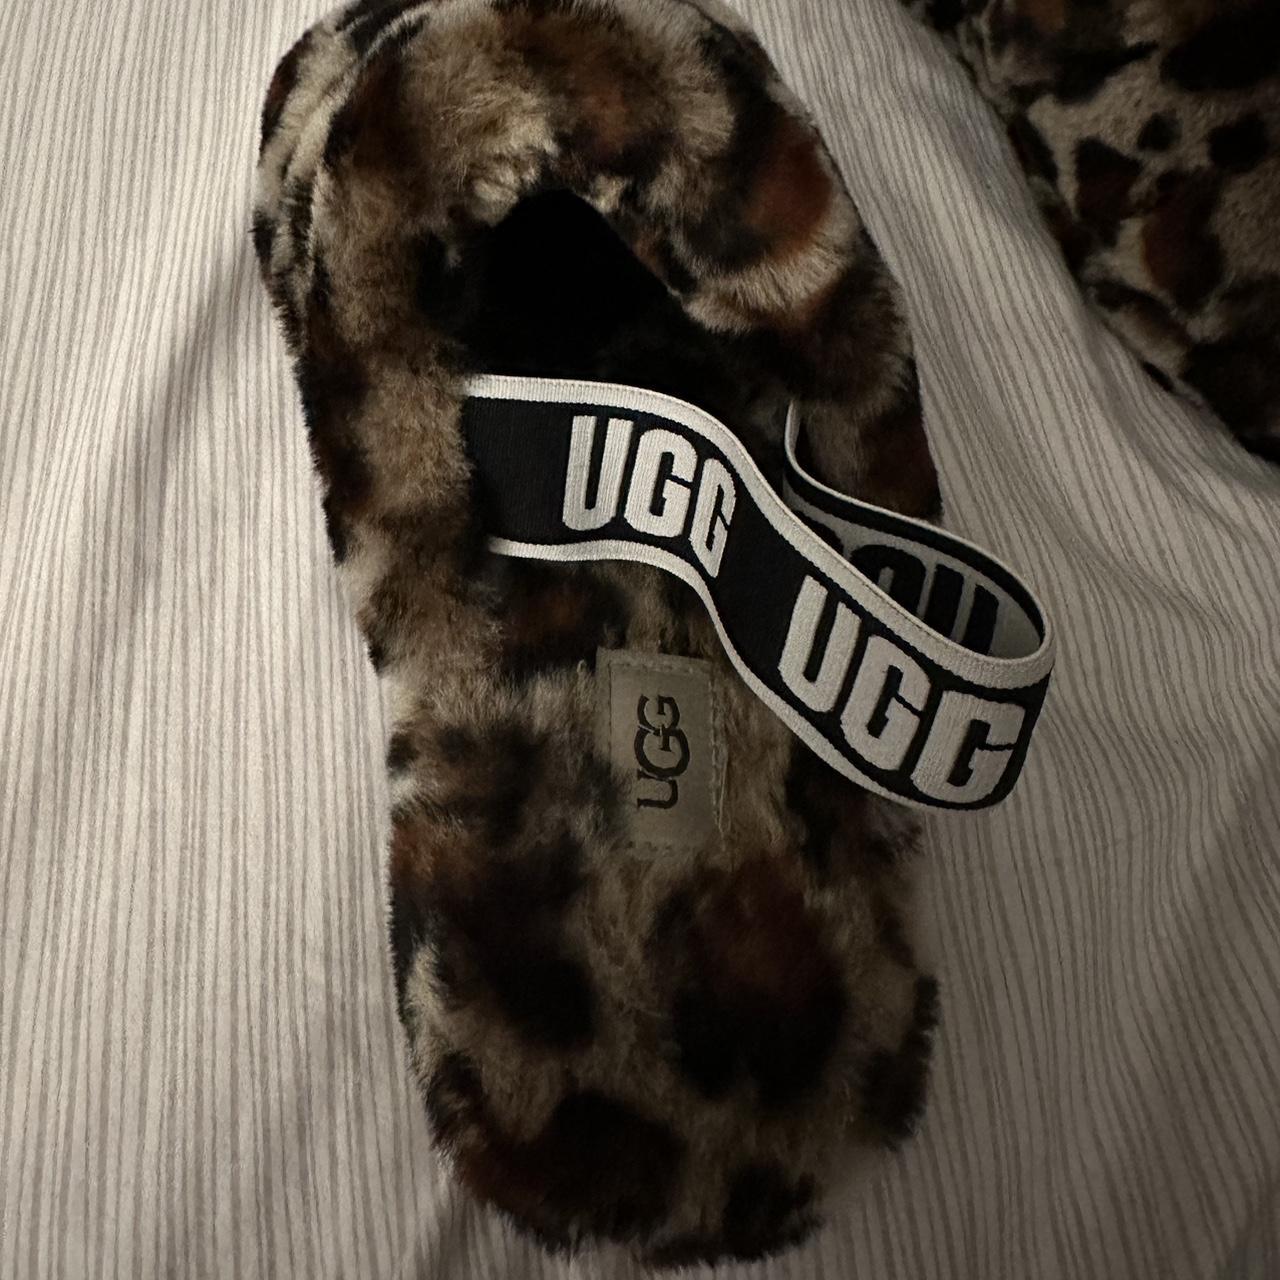 UGG Women's Tan and Black Slippers (3)